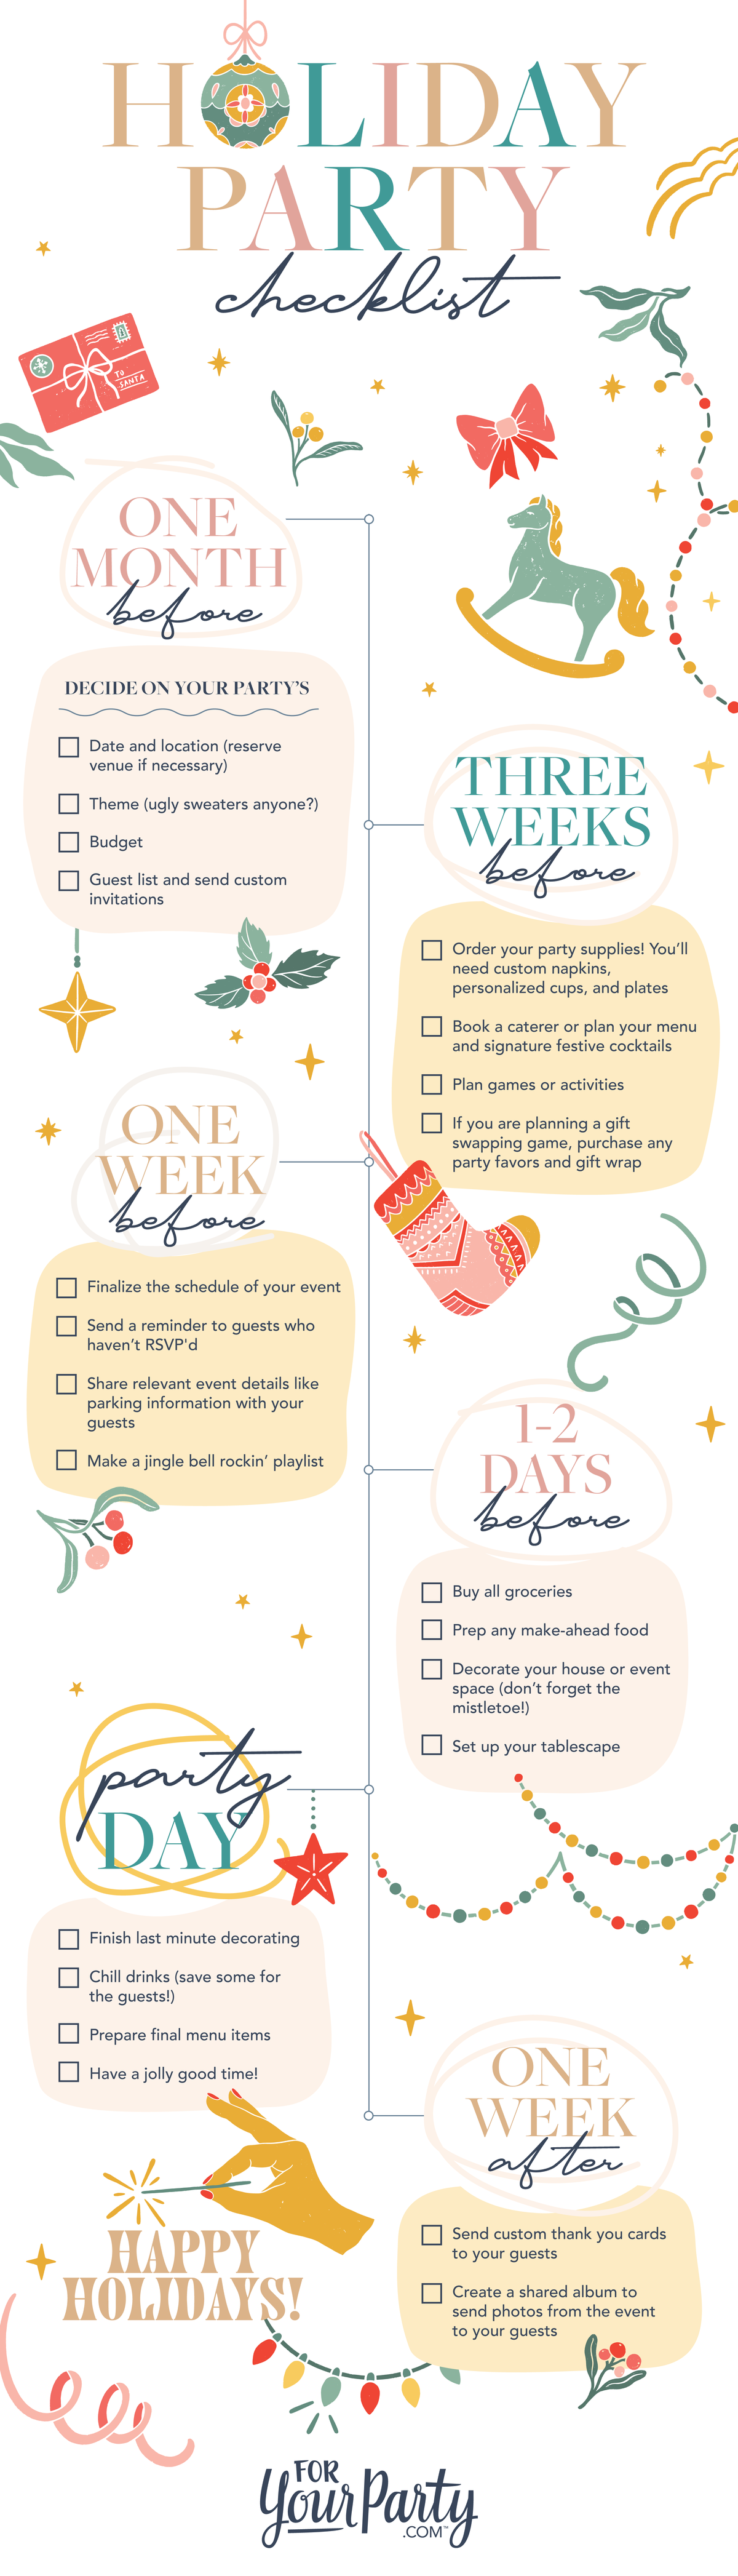 10 Things To Consider When Planning Your Company Holiday Party